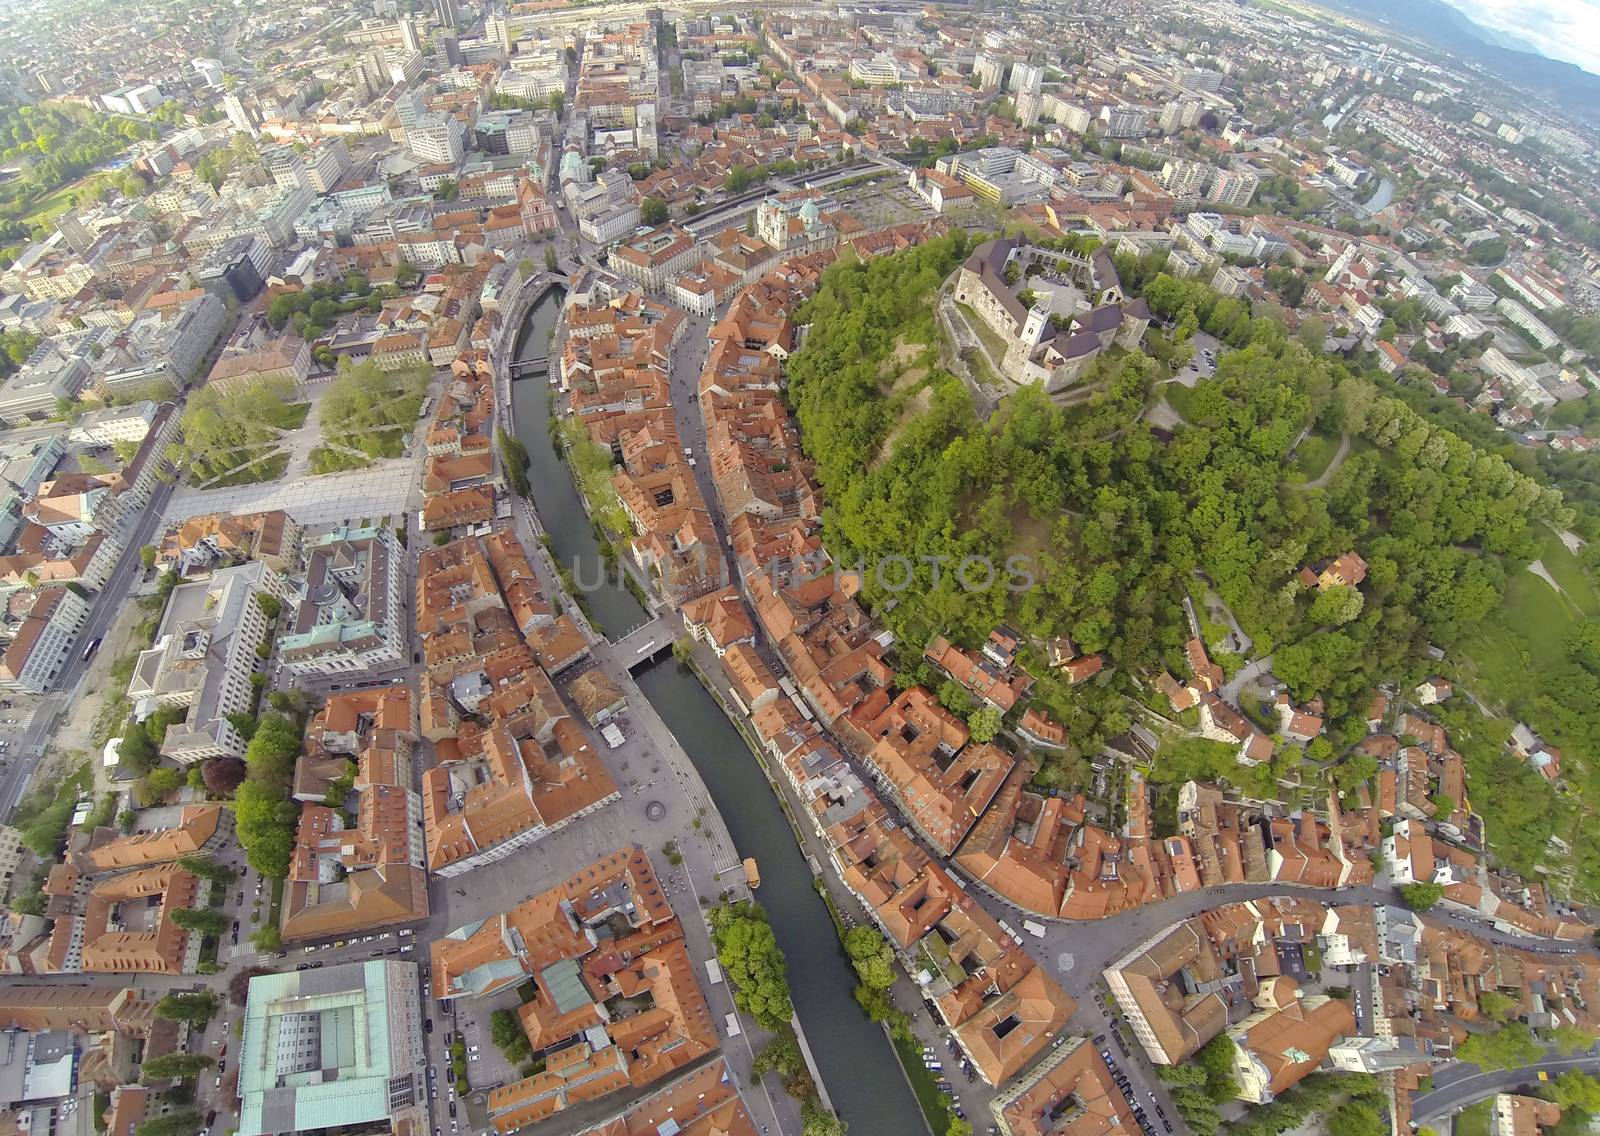 Areal photo of Ljubljana, capital of Slovenia. View from above on the historic centre of the city.